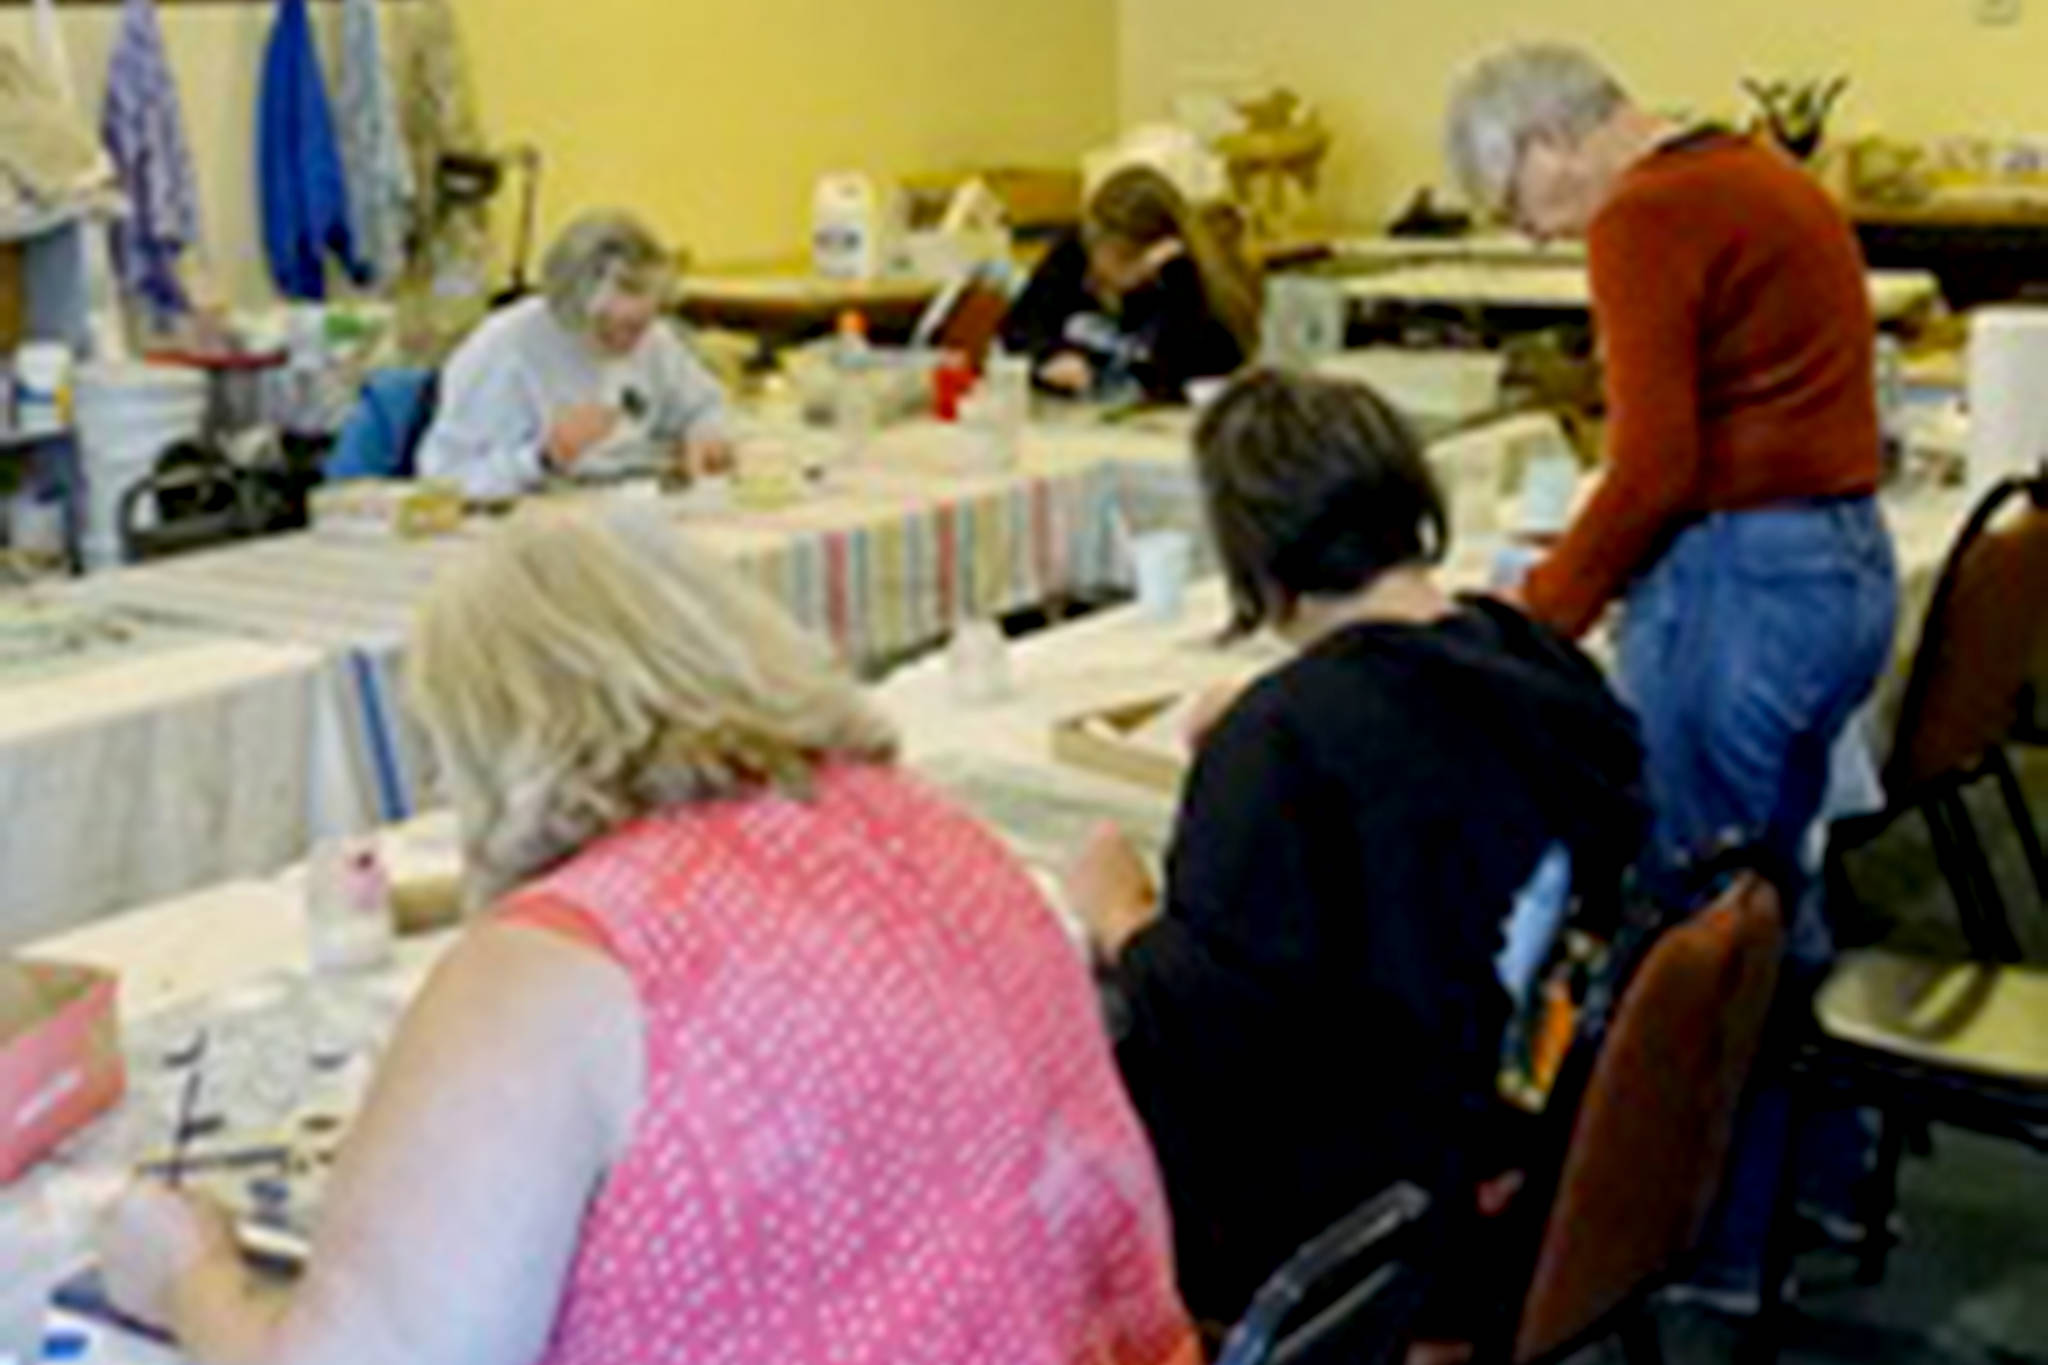 A glass mosaic class in session in 2019. The classes, closed earlier in the year due to COVID-19, will soon start back up at the Art on the Line Art Center in Oroville.